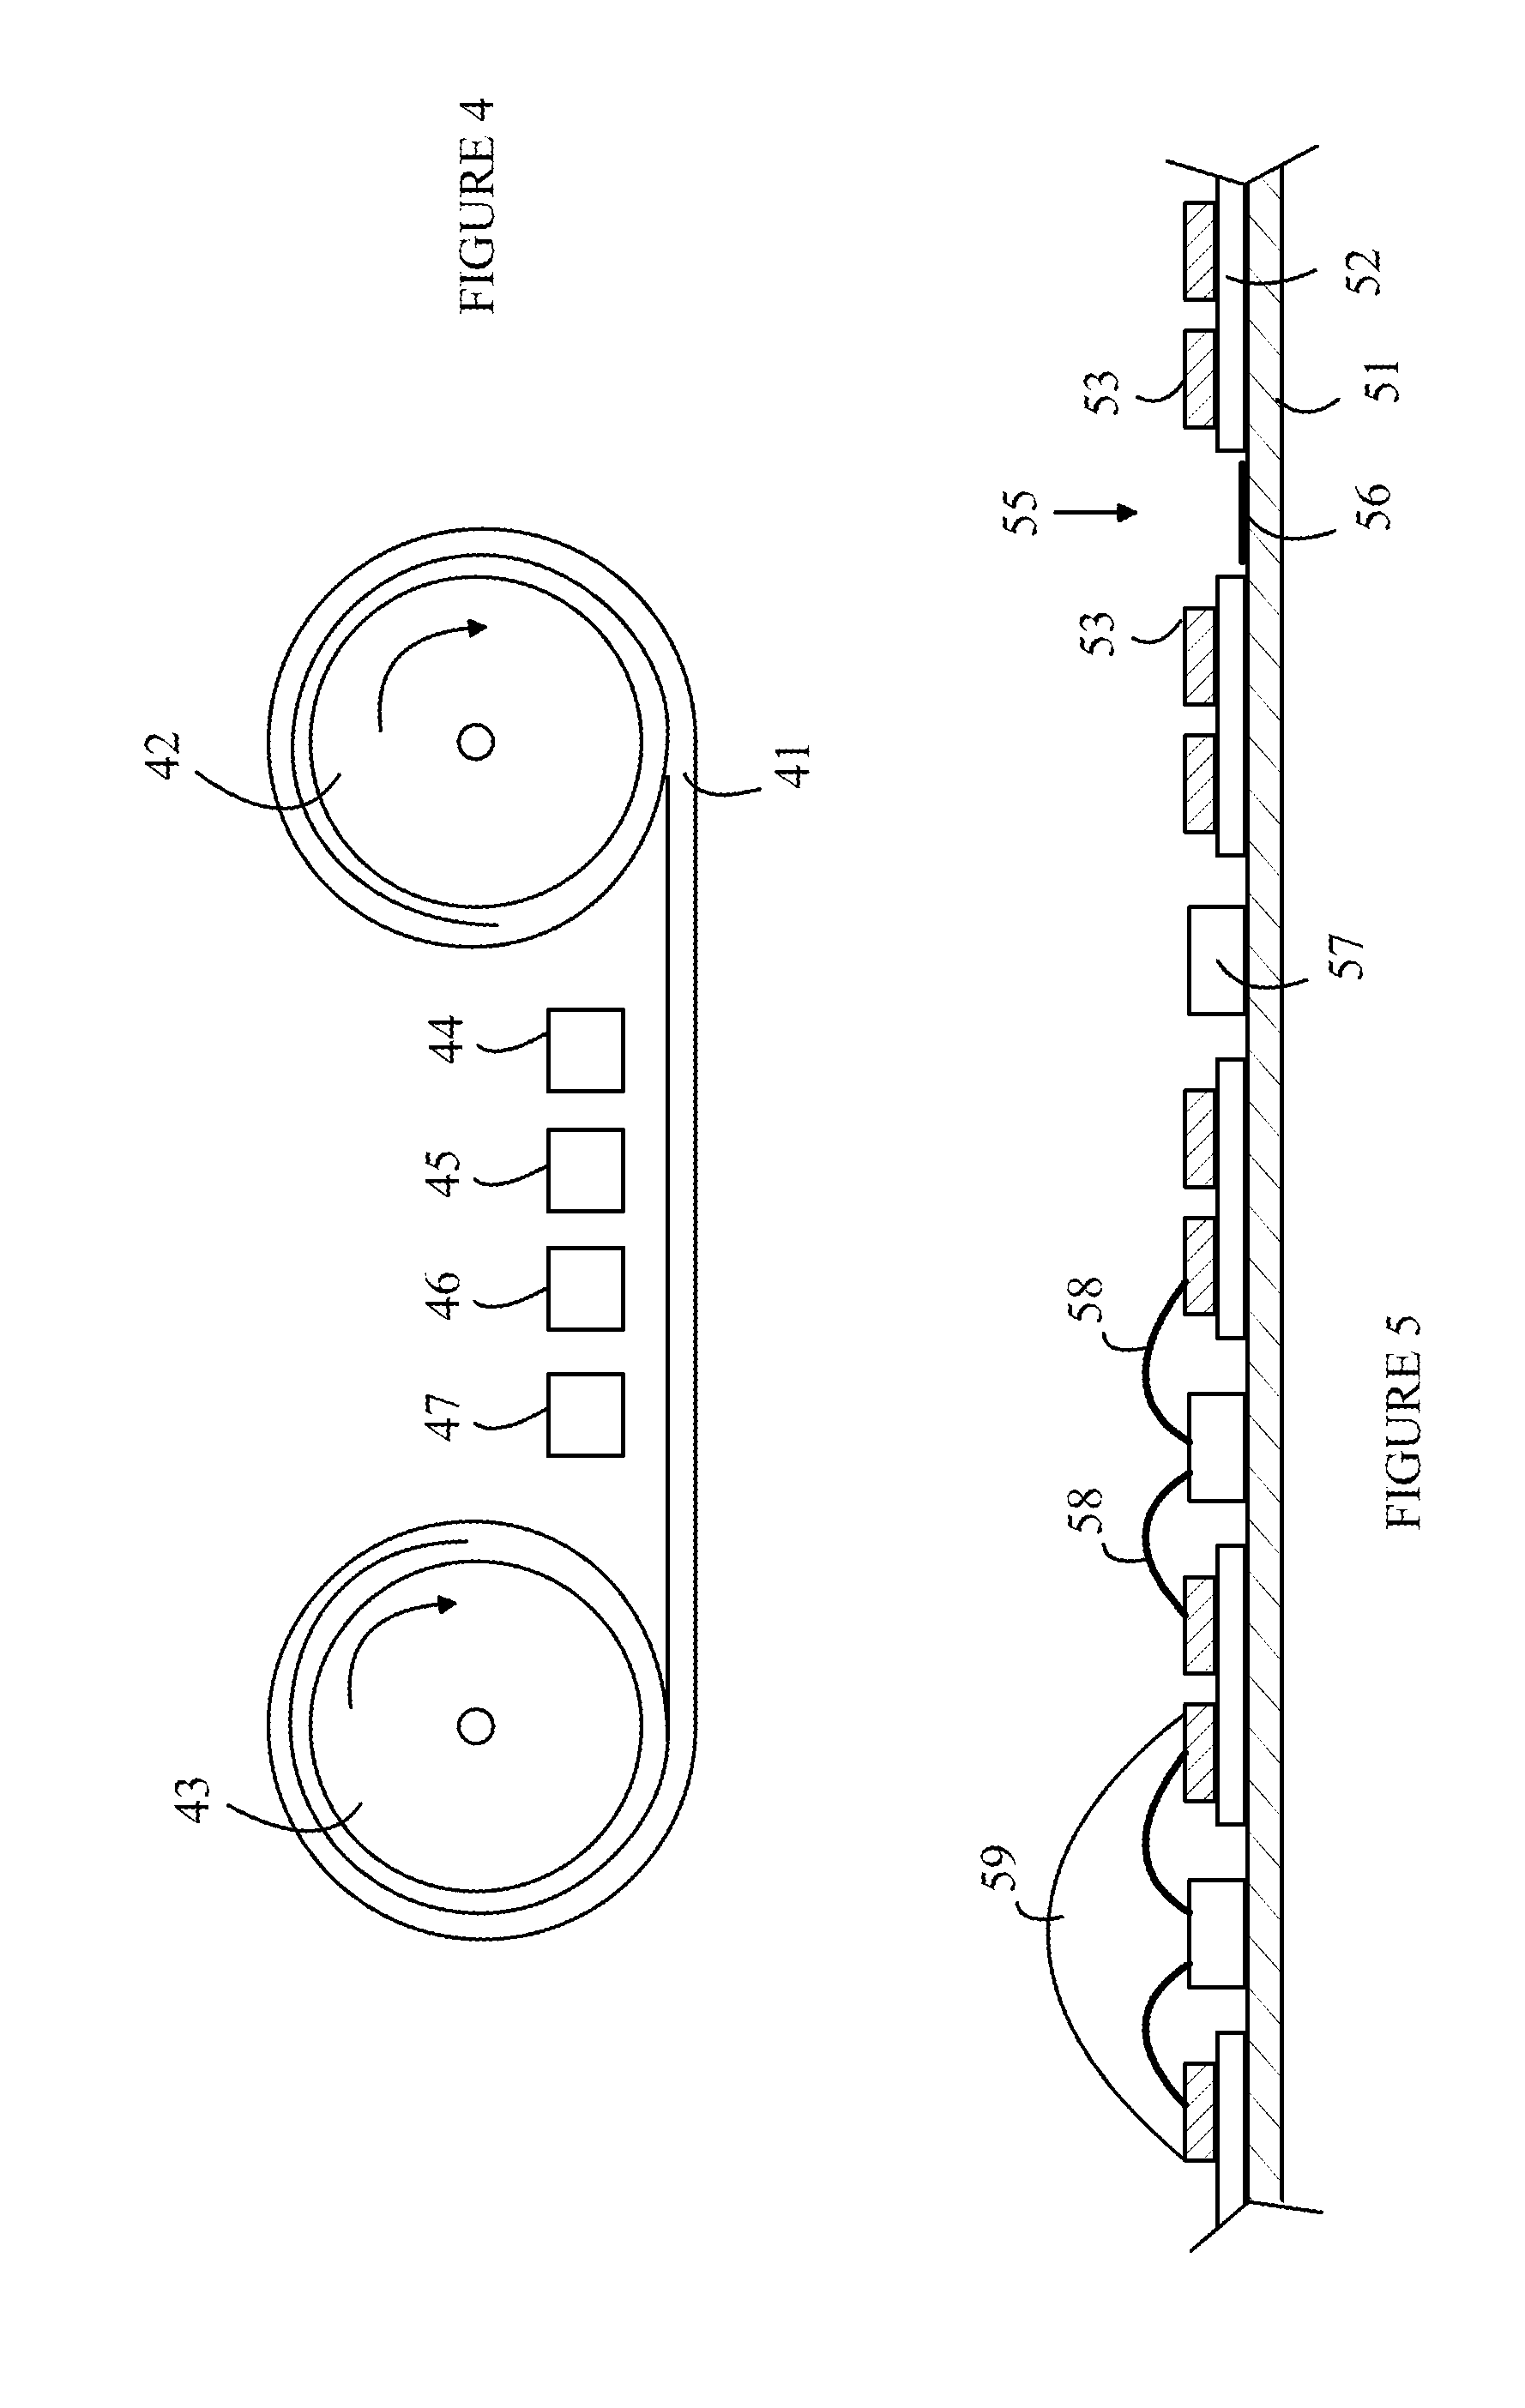 Flexible Distributed LED-Based Light Source and Method for Making the Same